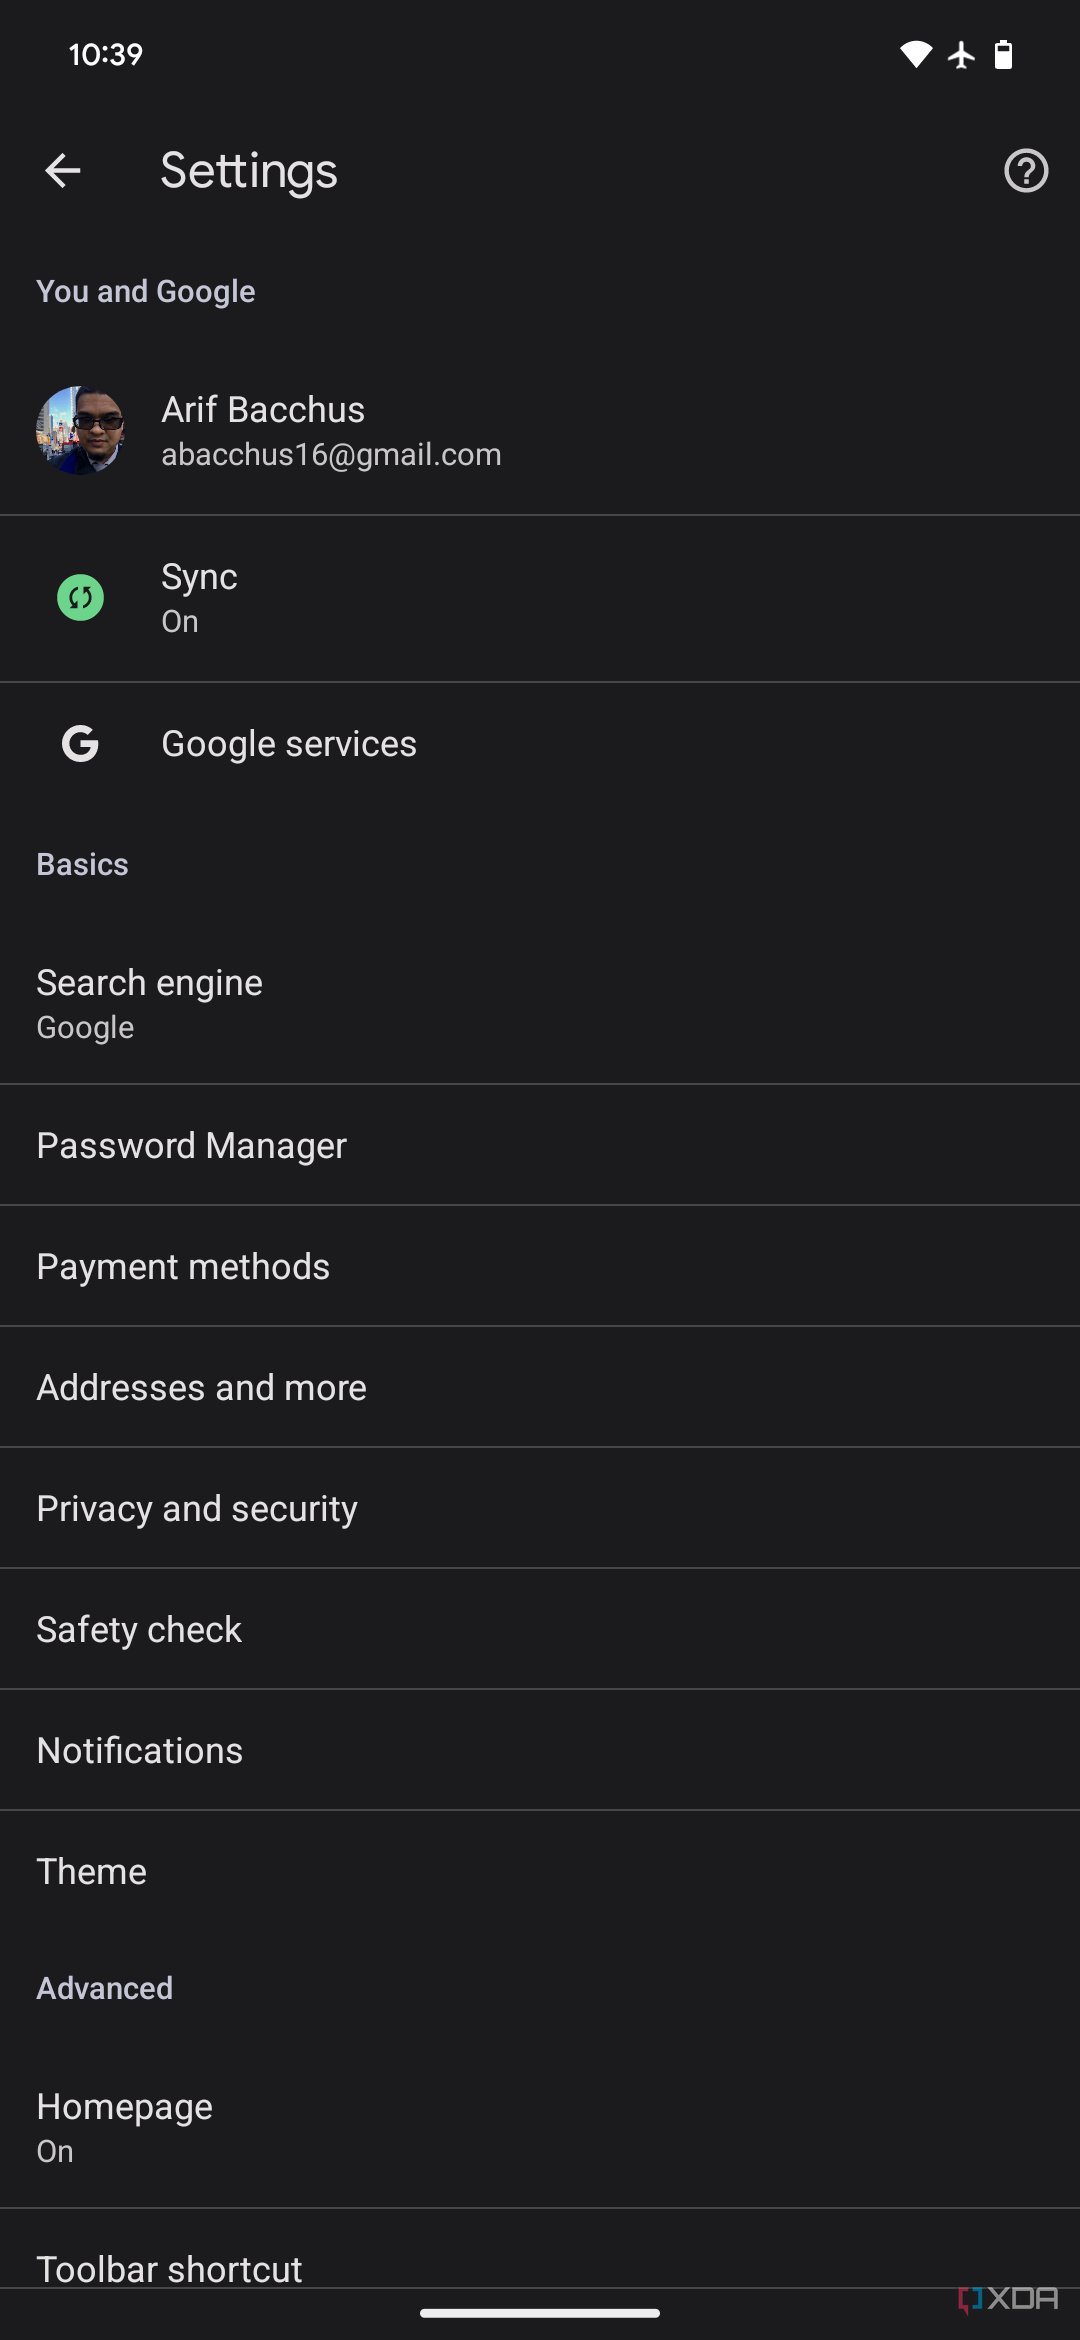 The Google Chrome settings app in Android